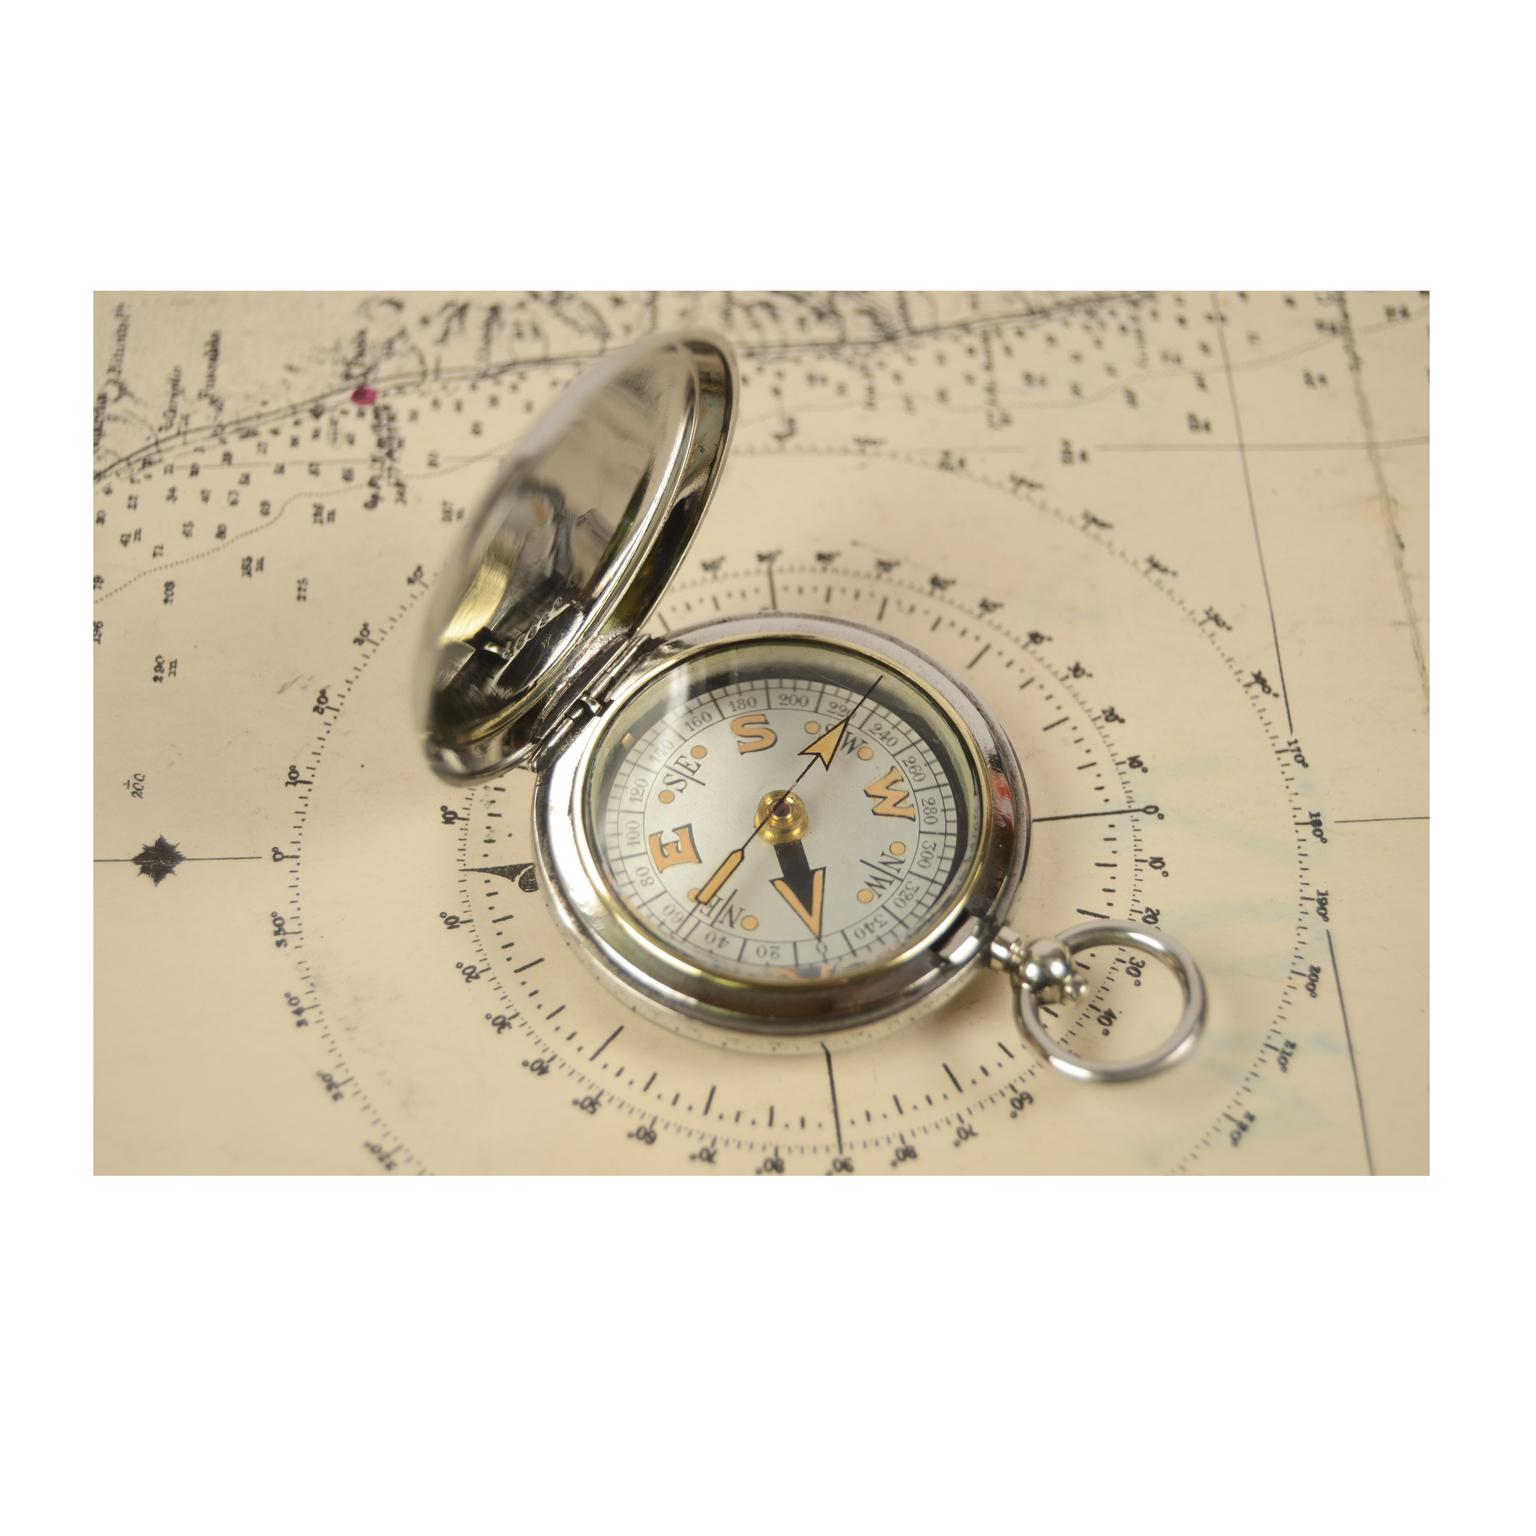 Pocket compass used by British aviation officers of chromed brass in the shape of a pocket watch, signed Dennison Birmingham VI 51263 from 1917. The compass has a snap-lock lid with release button inside the ring. Four-winds compass card complete